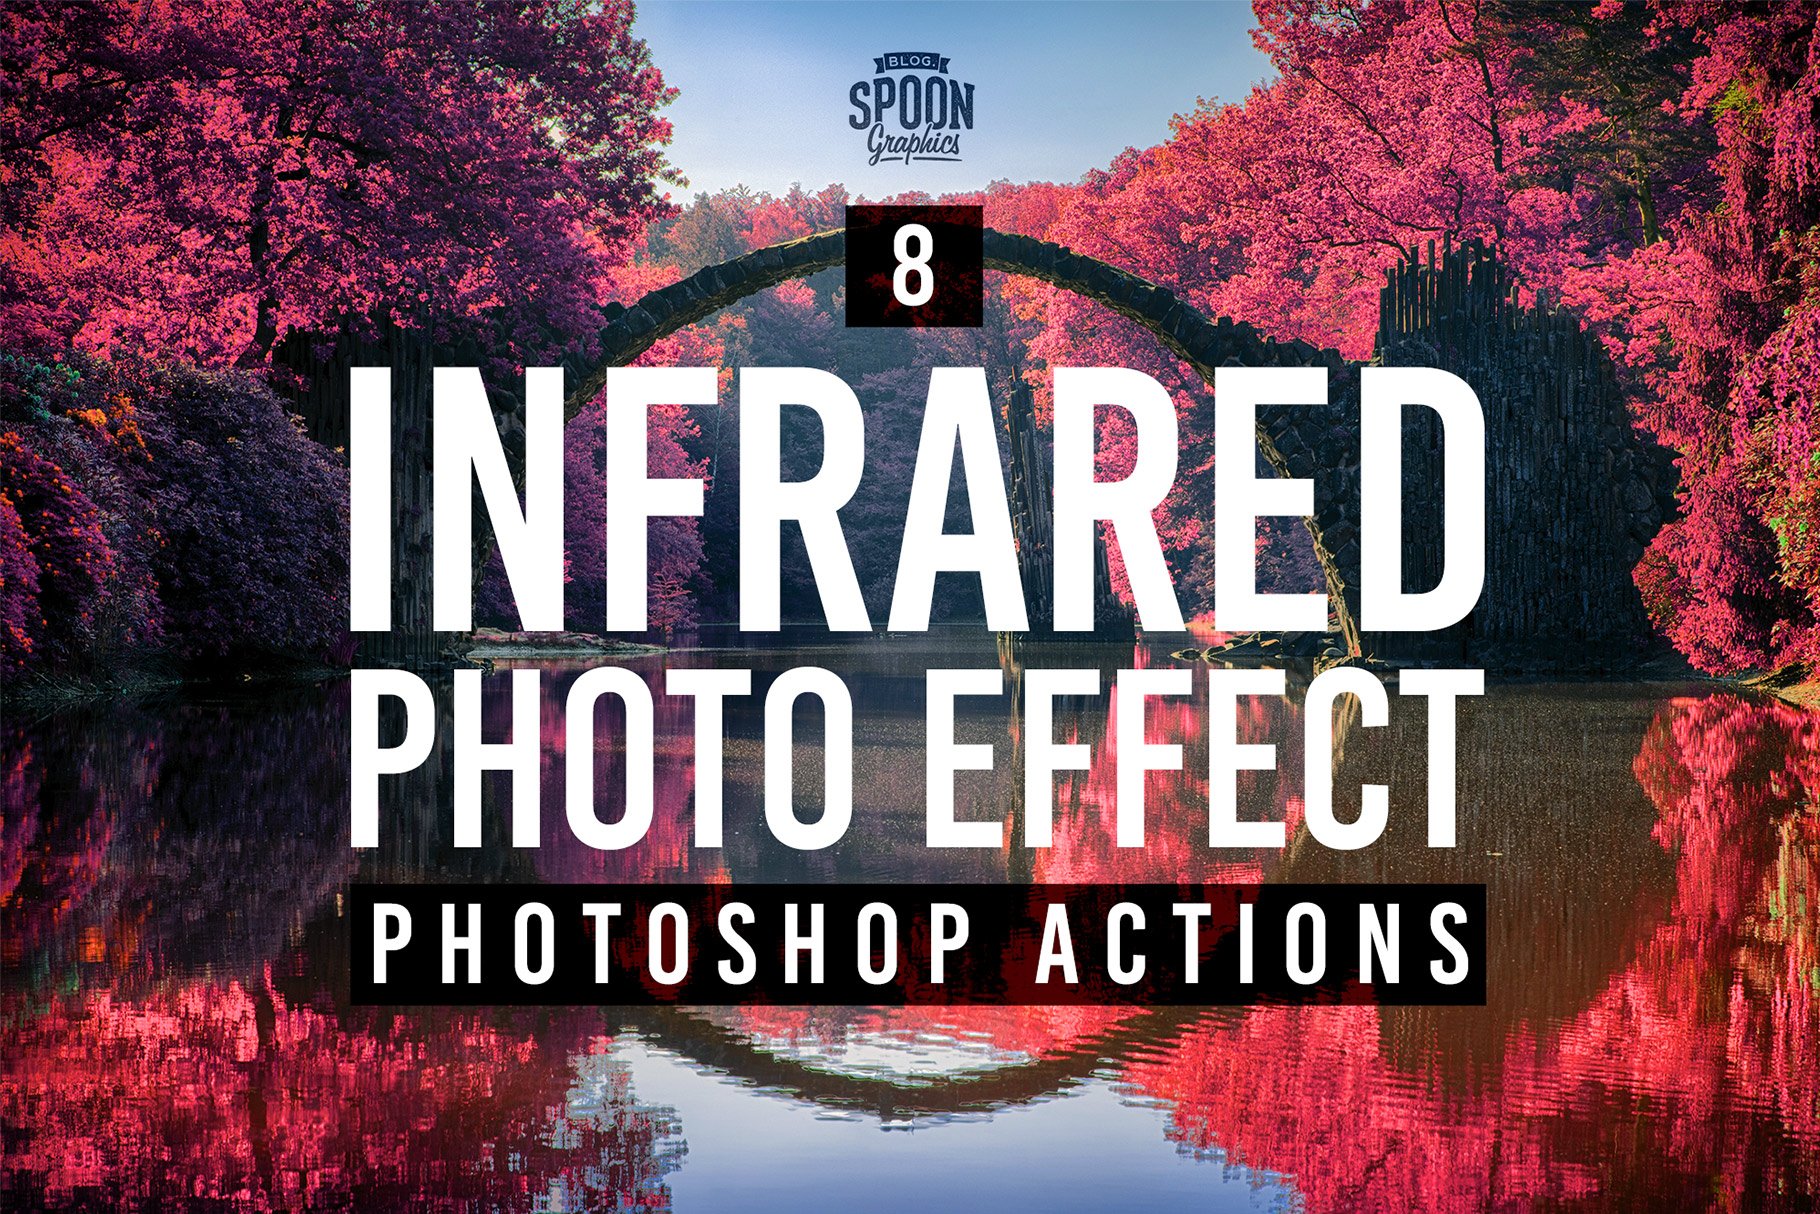 Infrared Photo Effect Actionscover image.